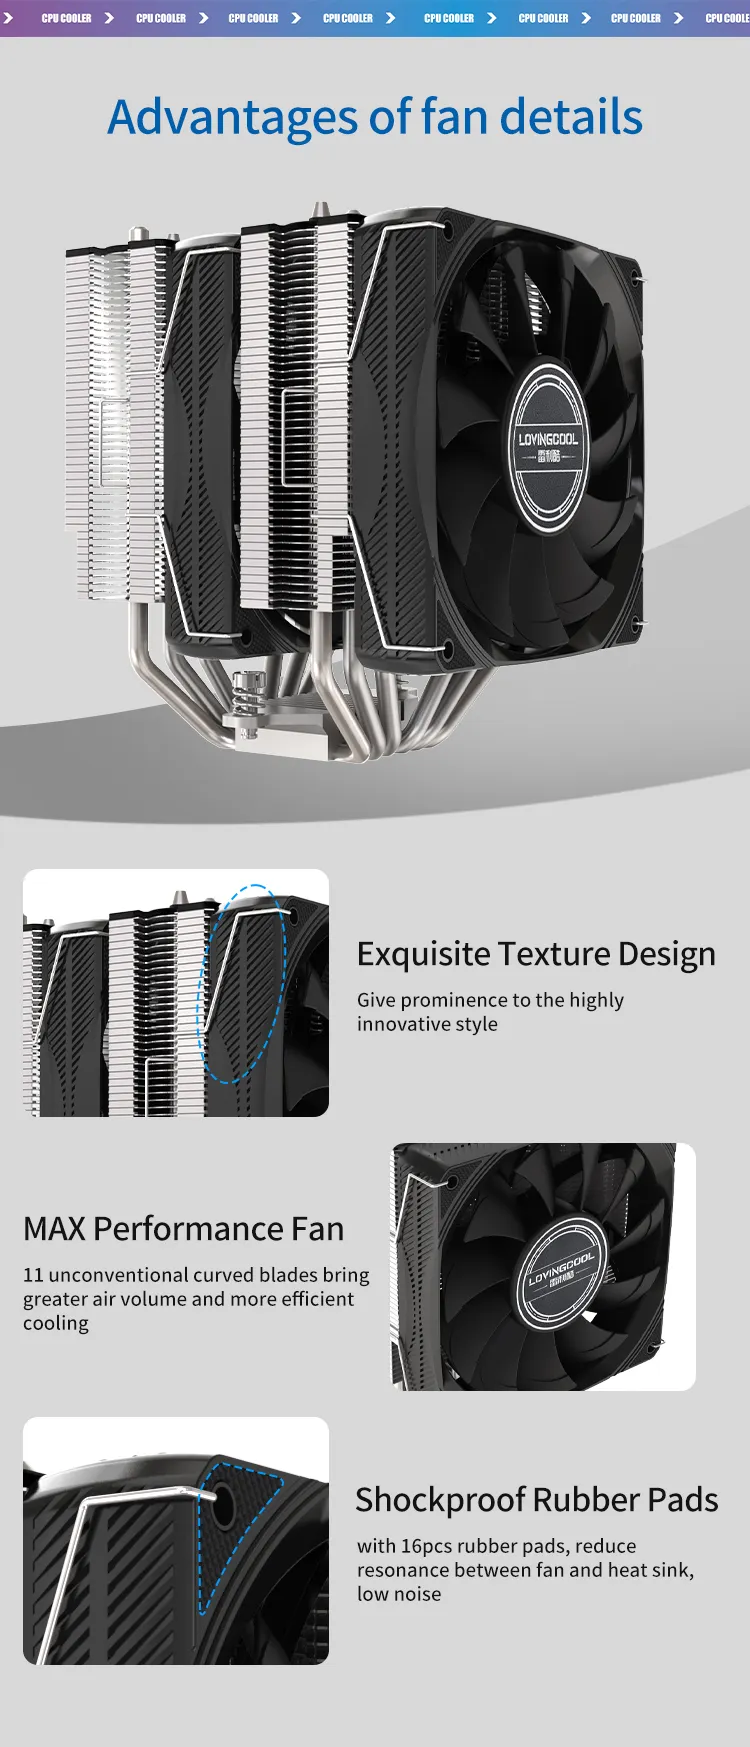 Lovingcool Hot sell High Quality CPU Gaming Cooler RGB Fan UFO ARGB PMW 5V 3Pin Computer Case PC Cooler AMD/Intel Aio CPU Tower